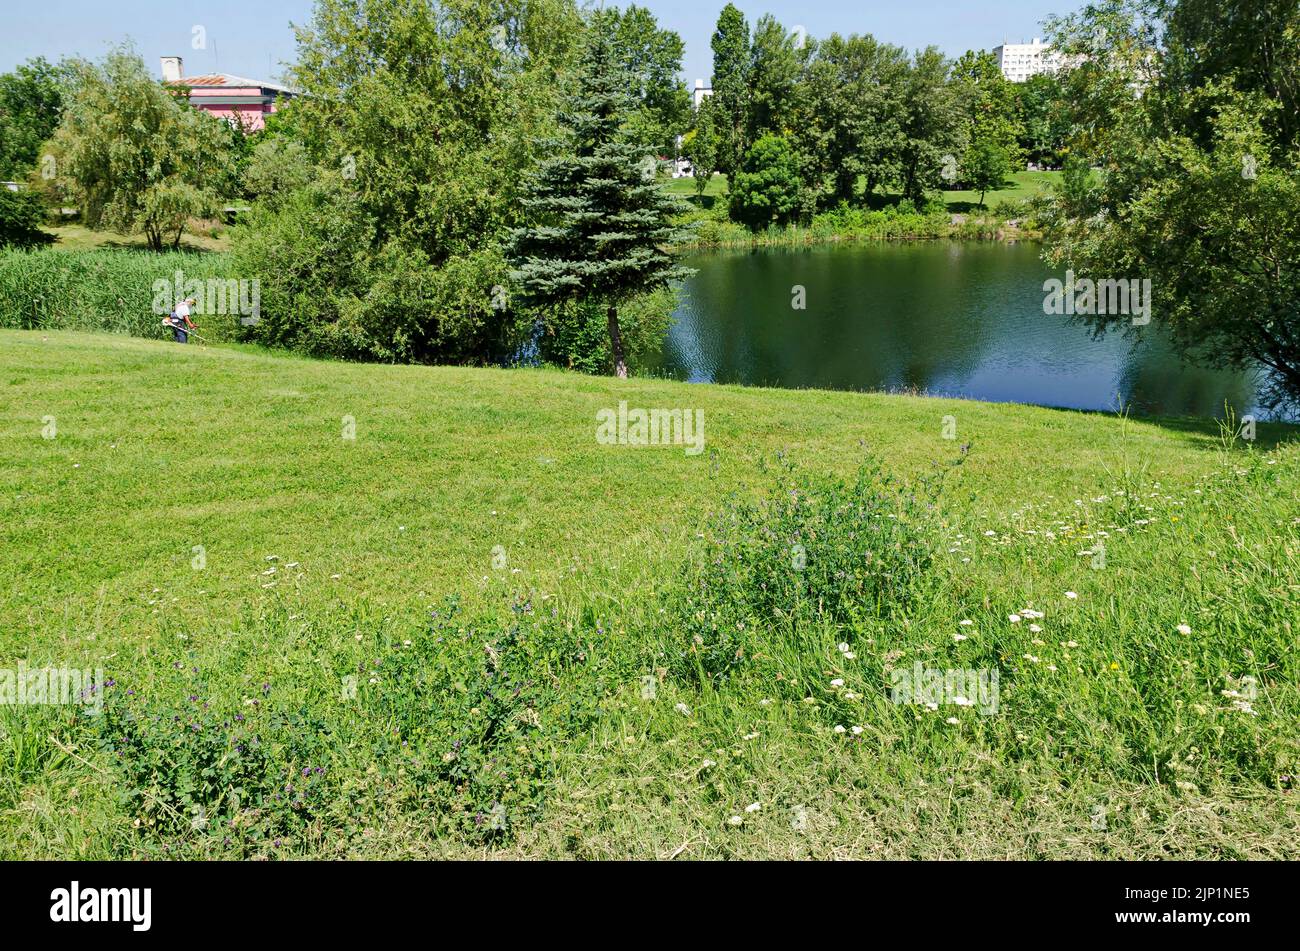 Spring with fresh trees and a meadow, a man with a lawnmower and a lake in the residential area, Drujba,  Sofia, Bulgaria Stock Photo